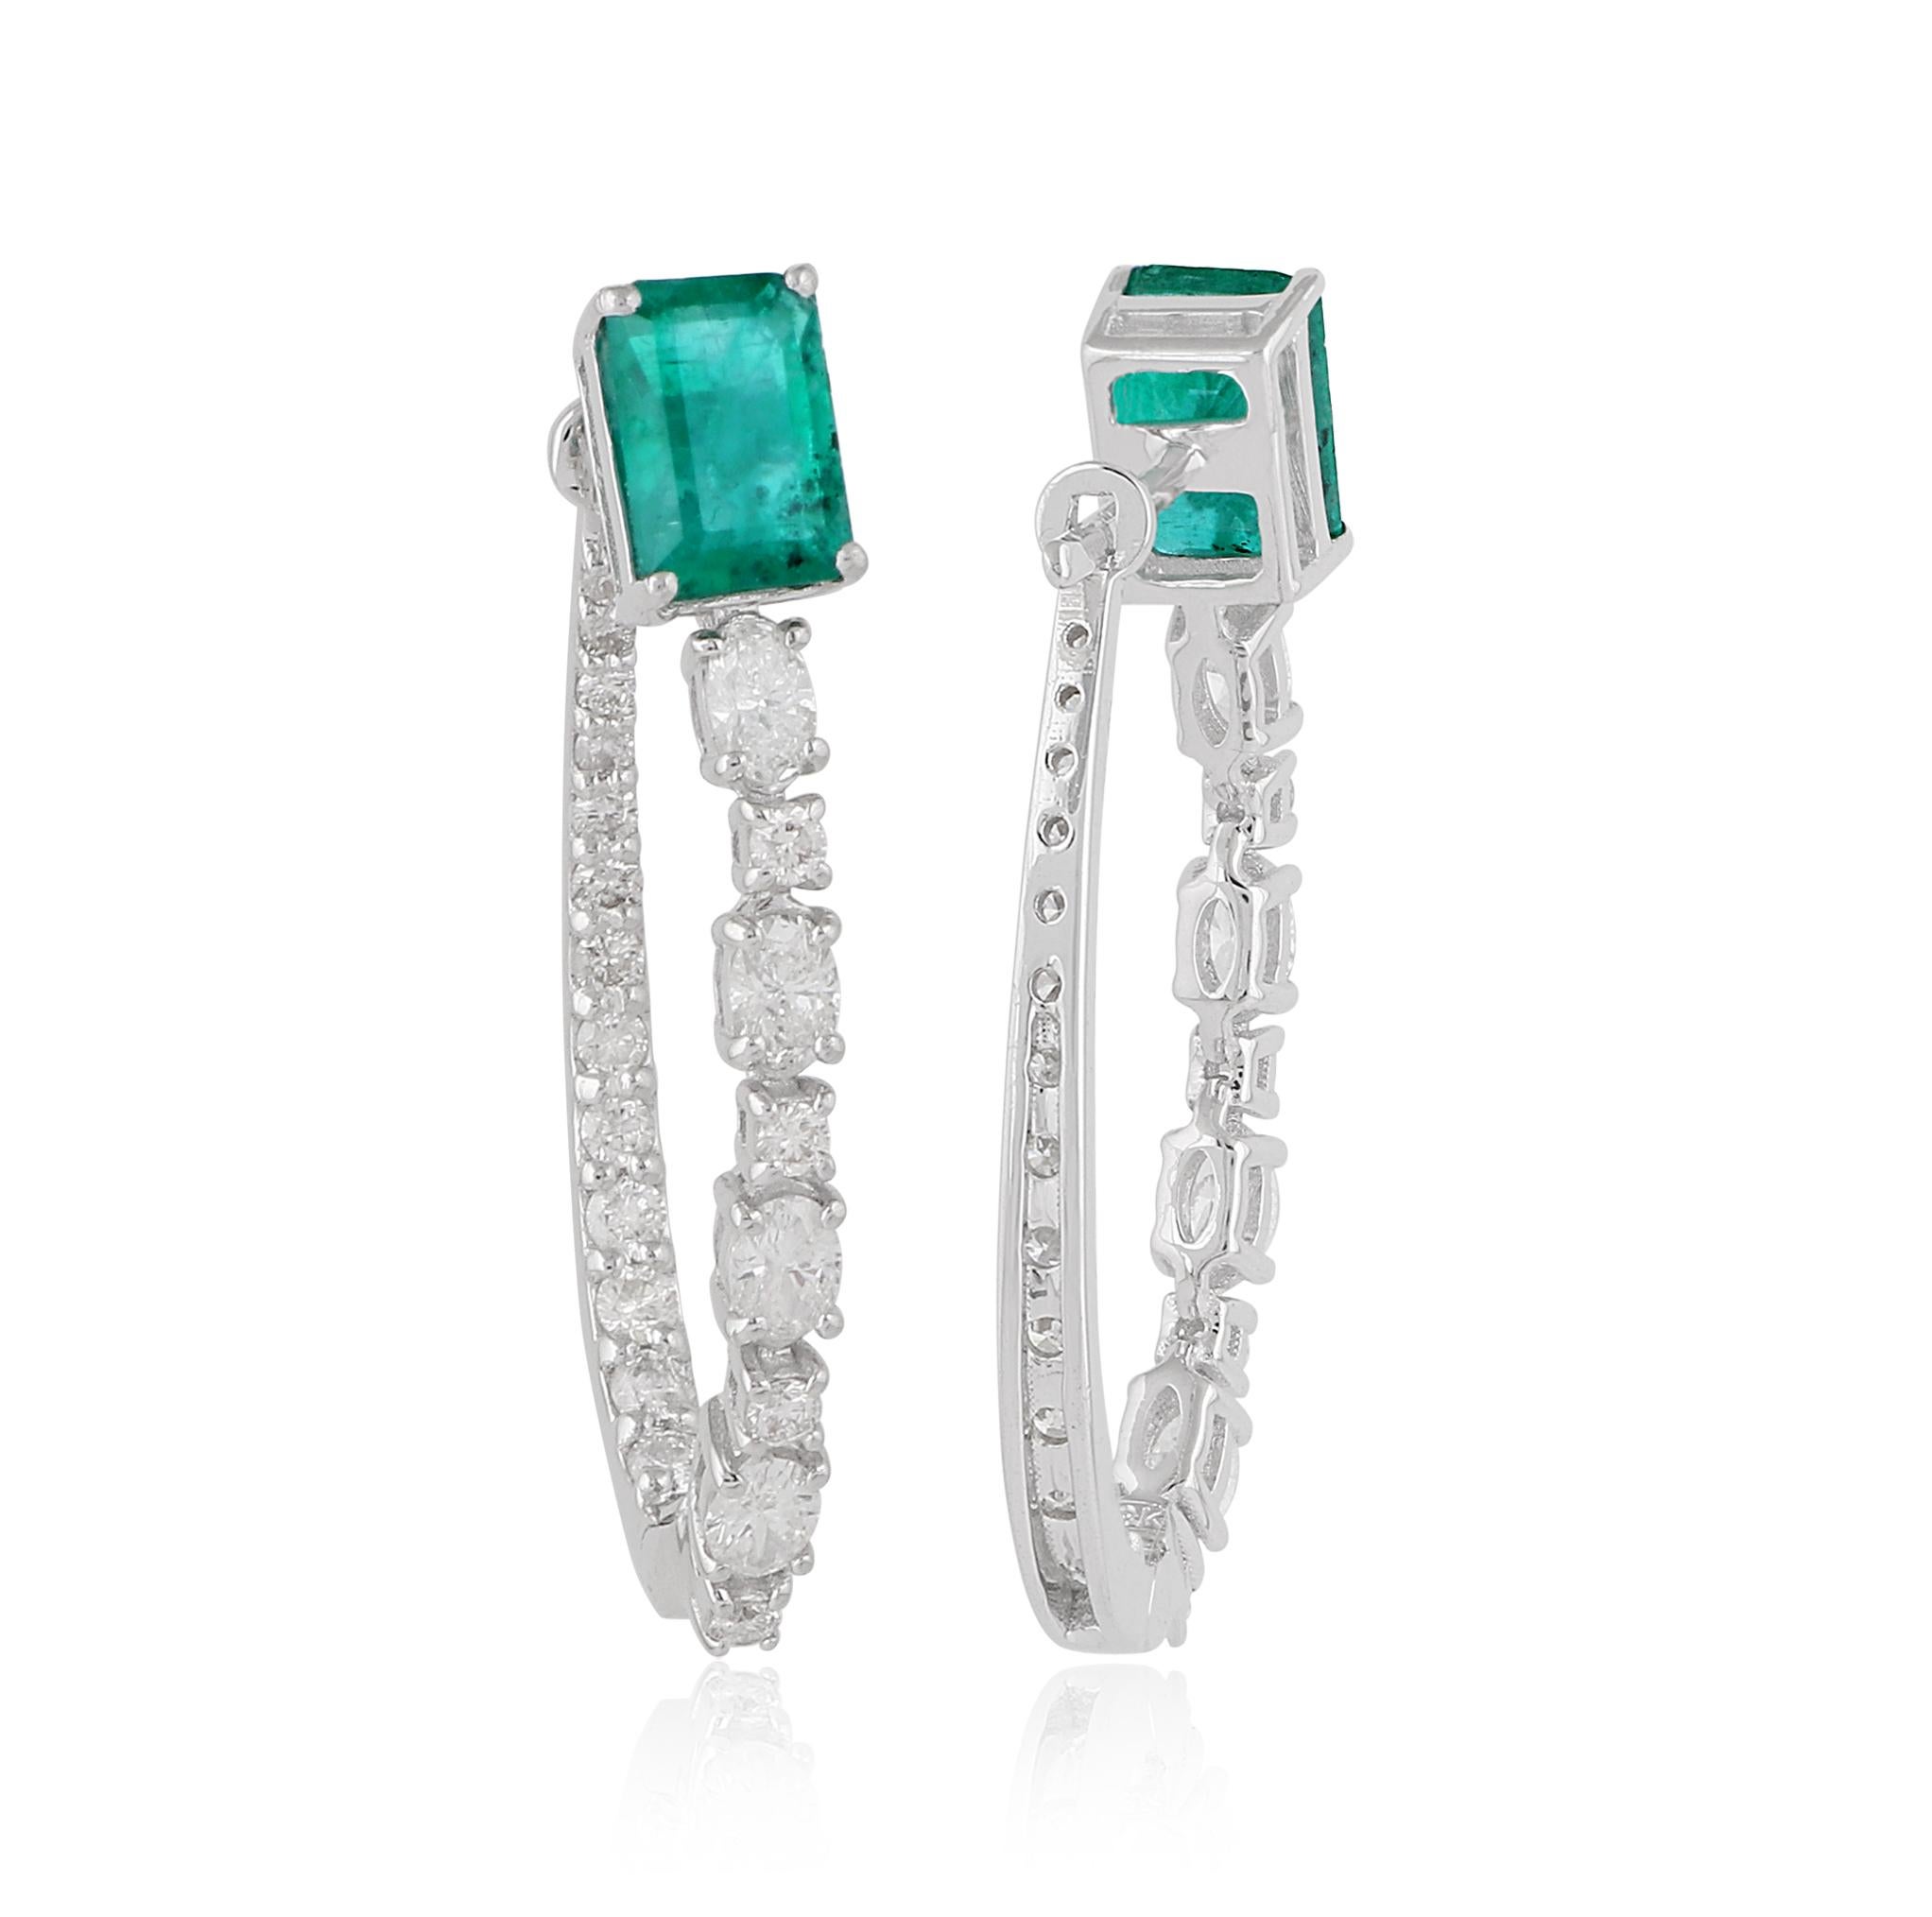 Item Code :- SEE-1195
Gross Wet. :- 5.56 gm
18k Solid White Gold Wet. :- 4.84 gm
Natural Diamond Wet. :- 1.60 ct. ( AVERAGE DIAMOND CLARITY SI1-SI2 & COLOR H-I )
Emerald Wet. :- 2 Ct.
Earrings Length :- 31 mm approx.

✦